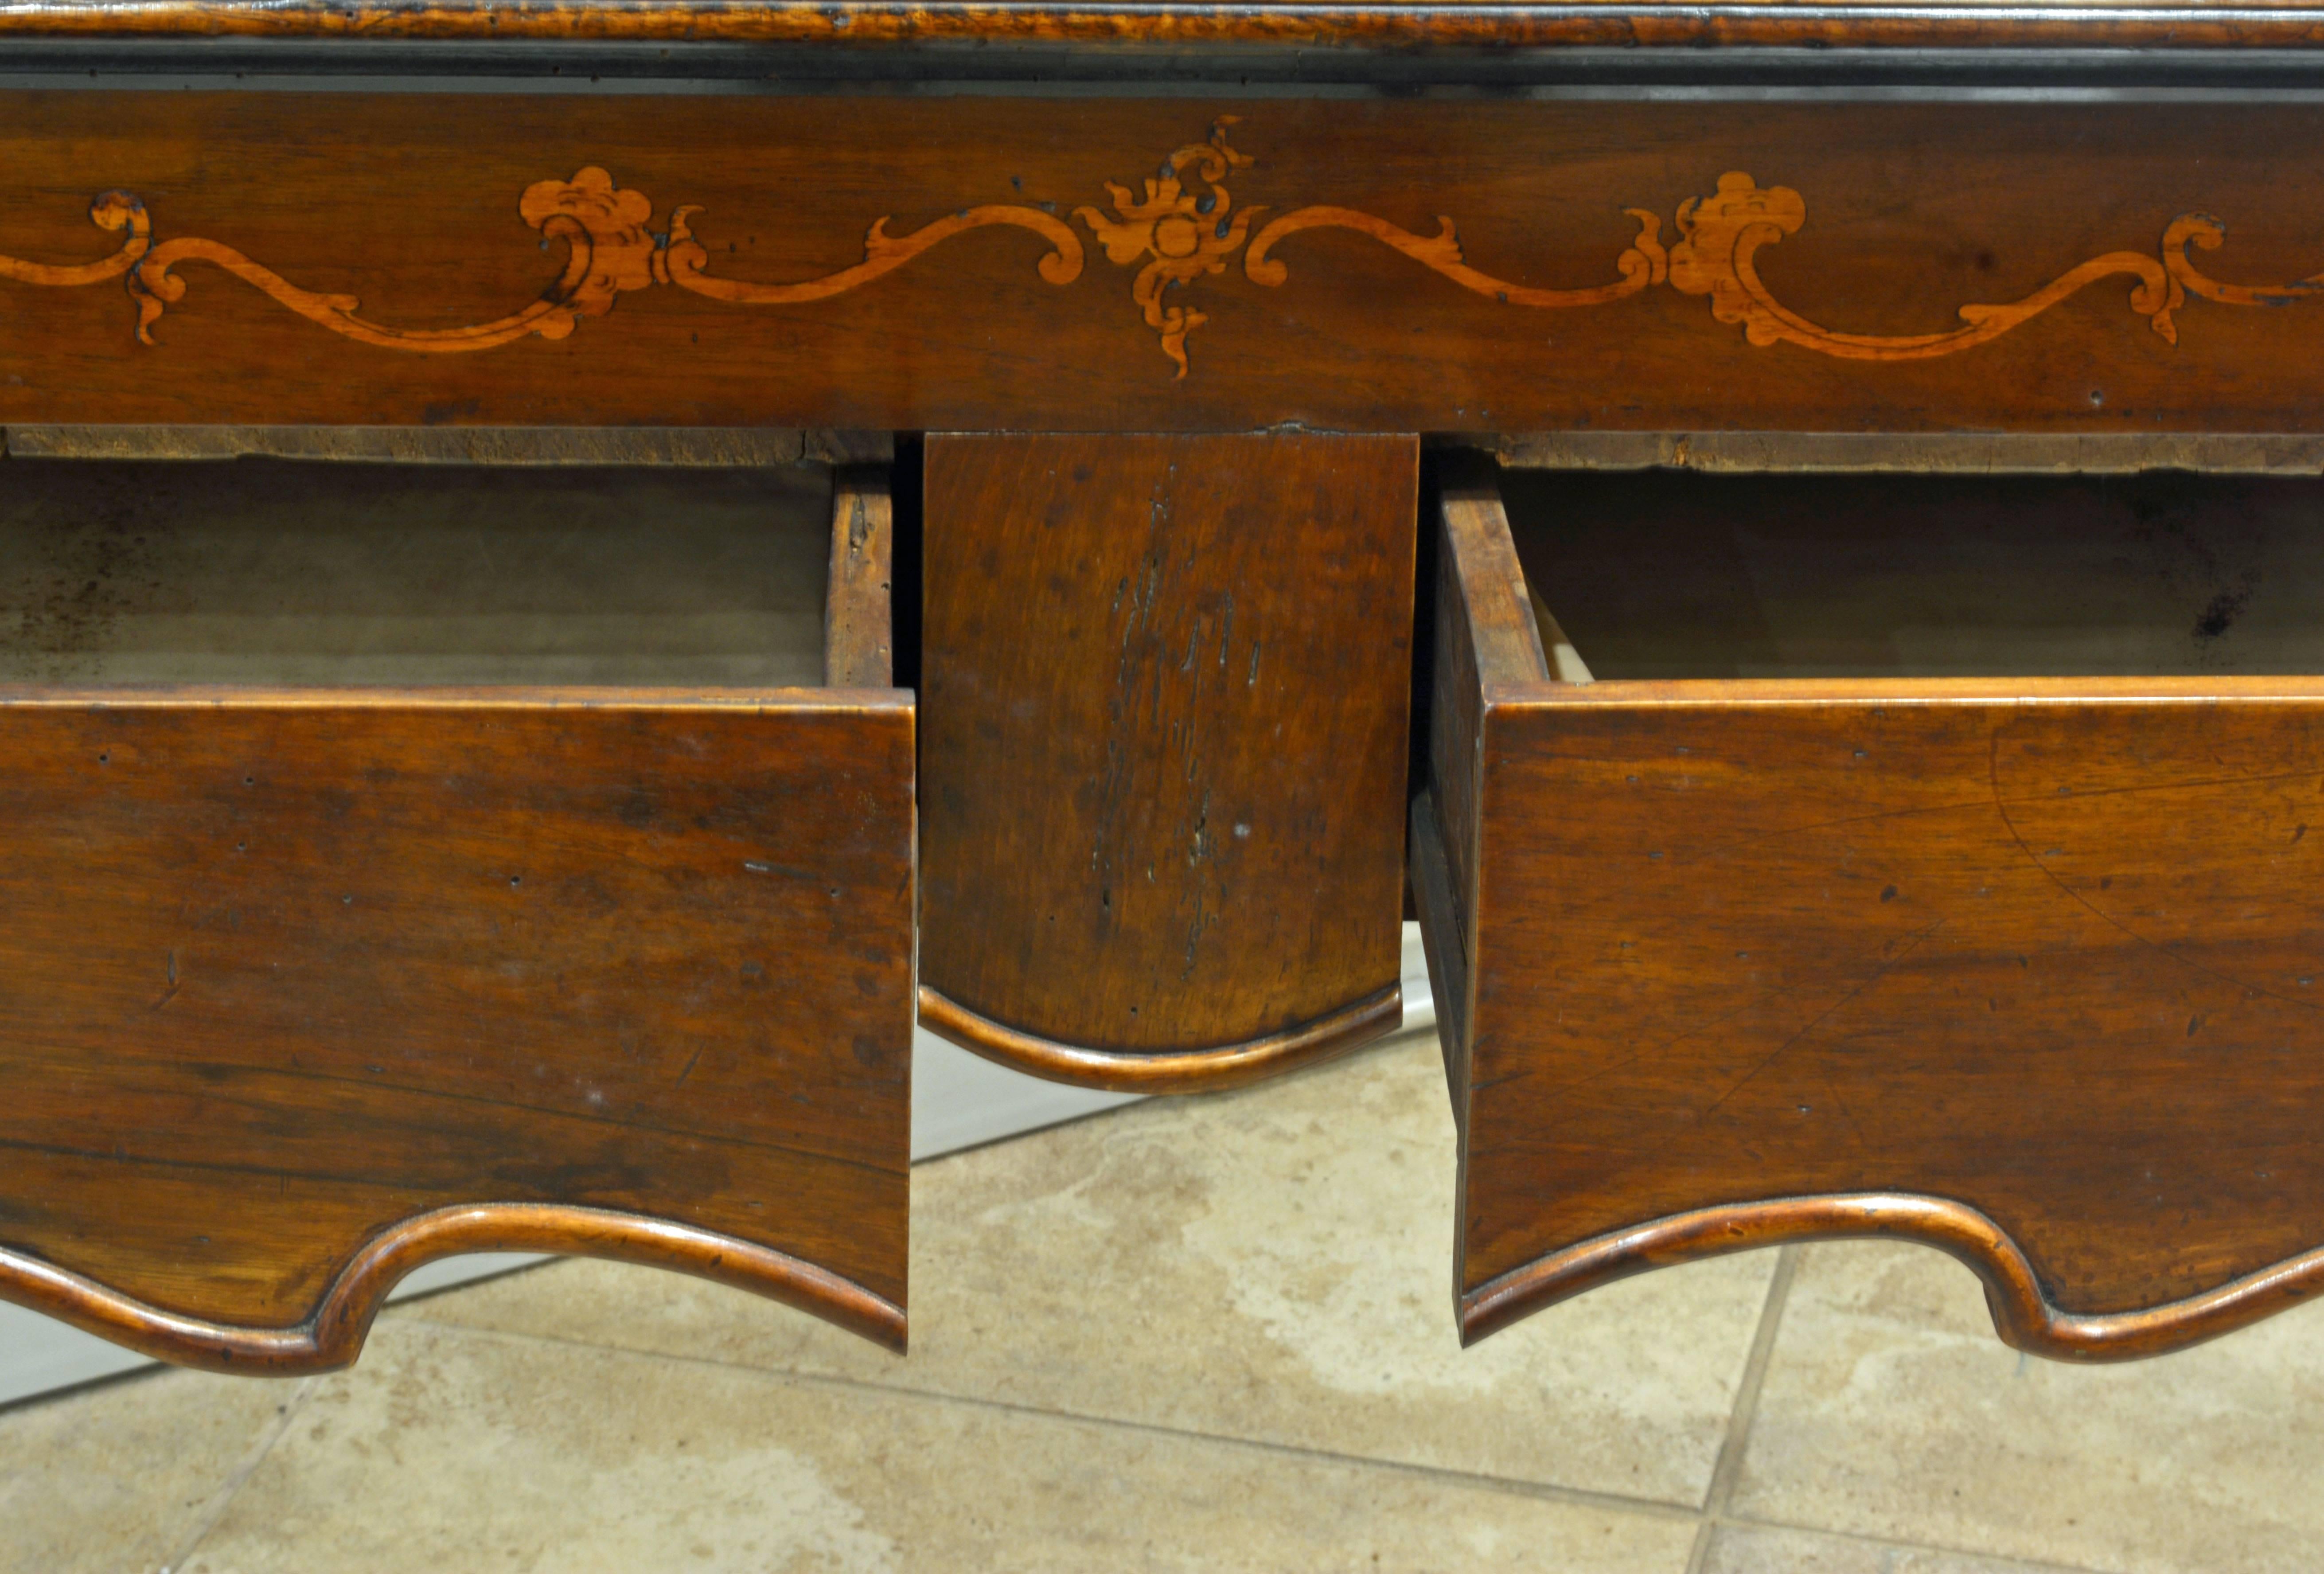 Brass Charming 18th Century Italian Rococo Walnut and Fruitwood Inlaid Fall Front Desk